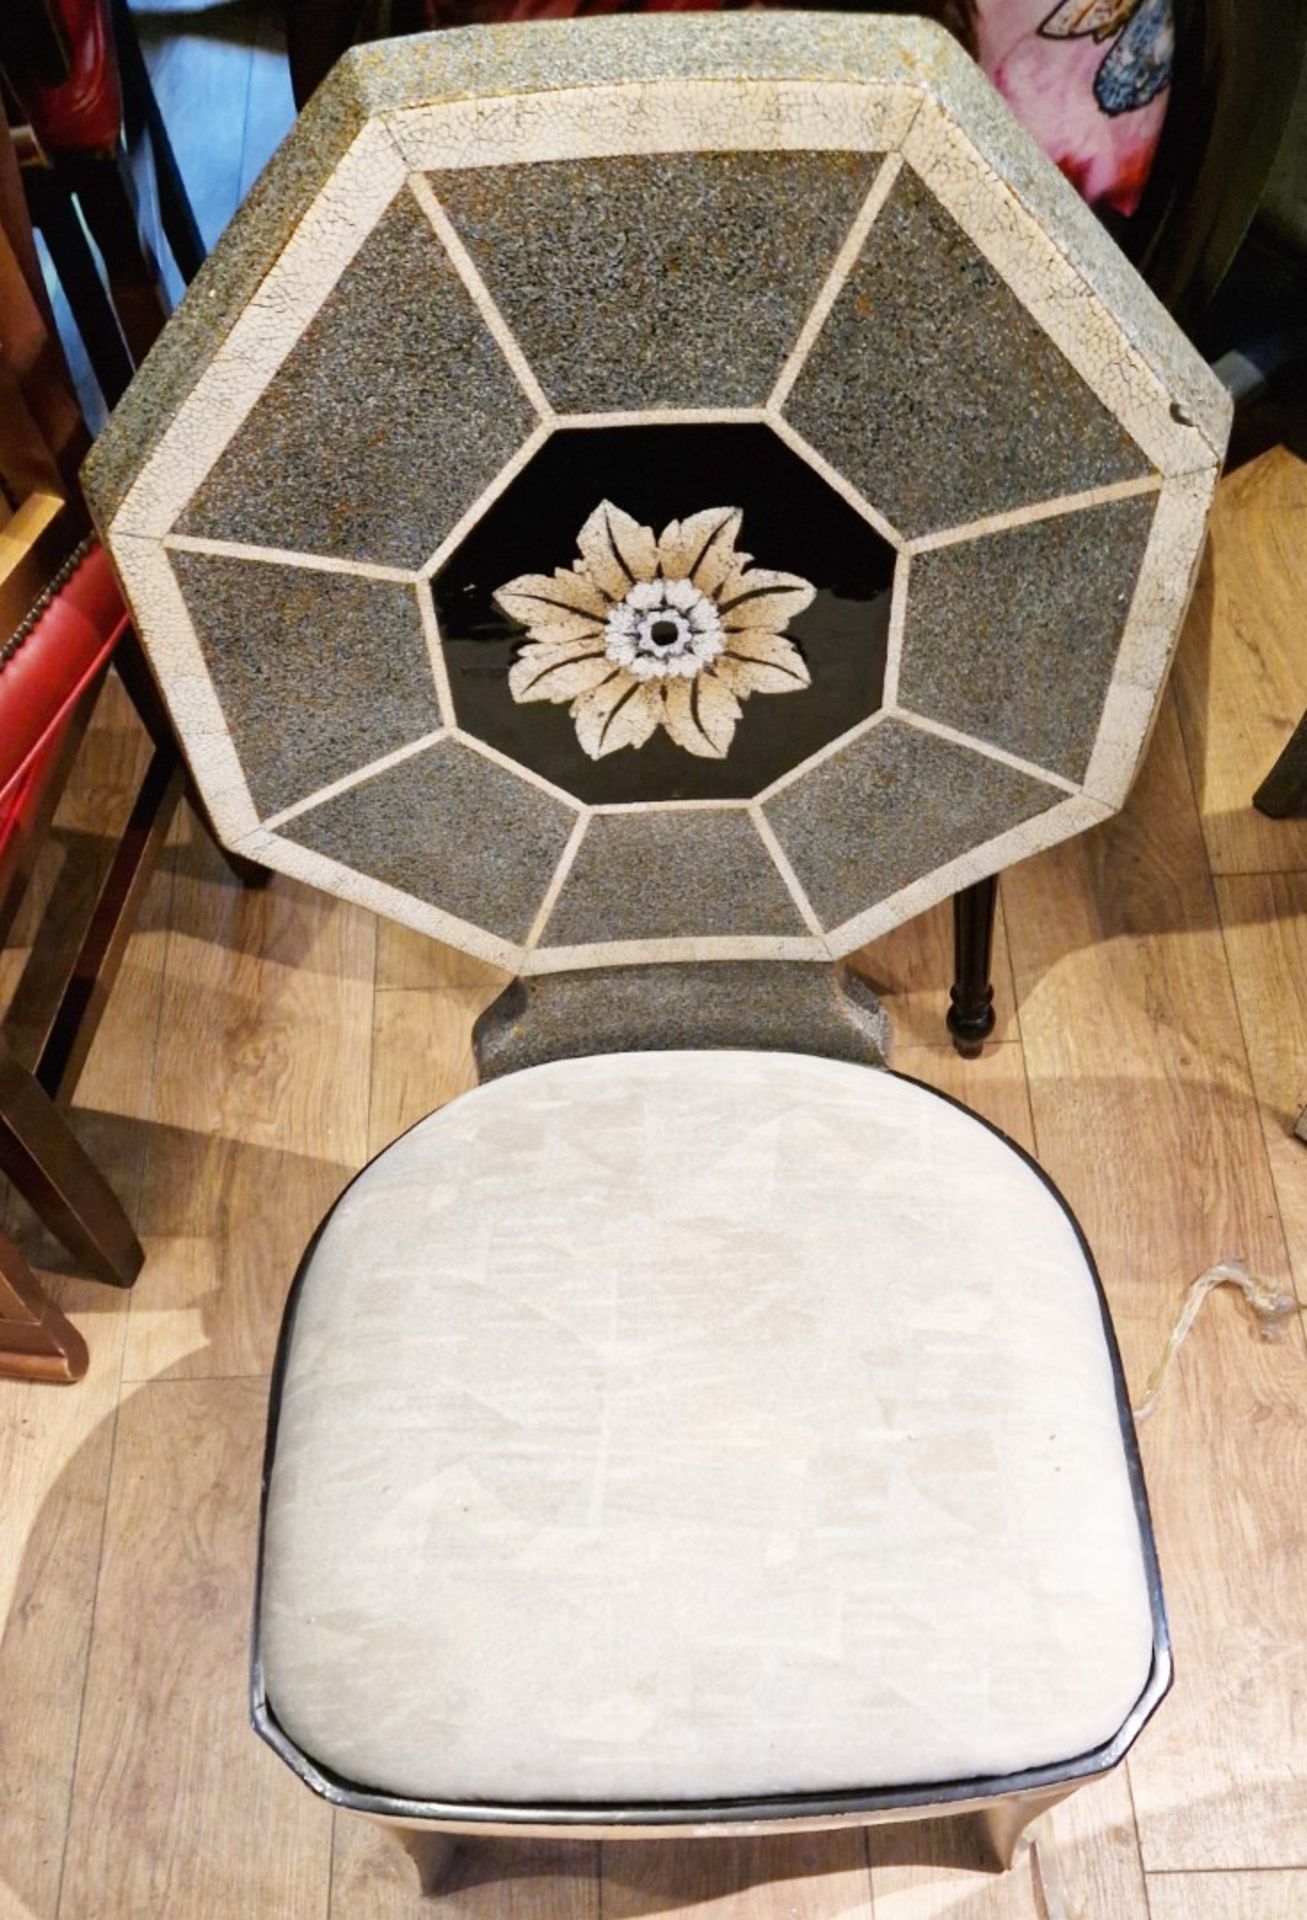 Set Of 2 x Bespoke Cracked Floral Tiled Dining Chairs, Leather Cushions With Silver Detail - Image 7 of 9